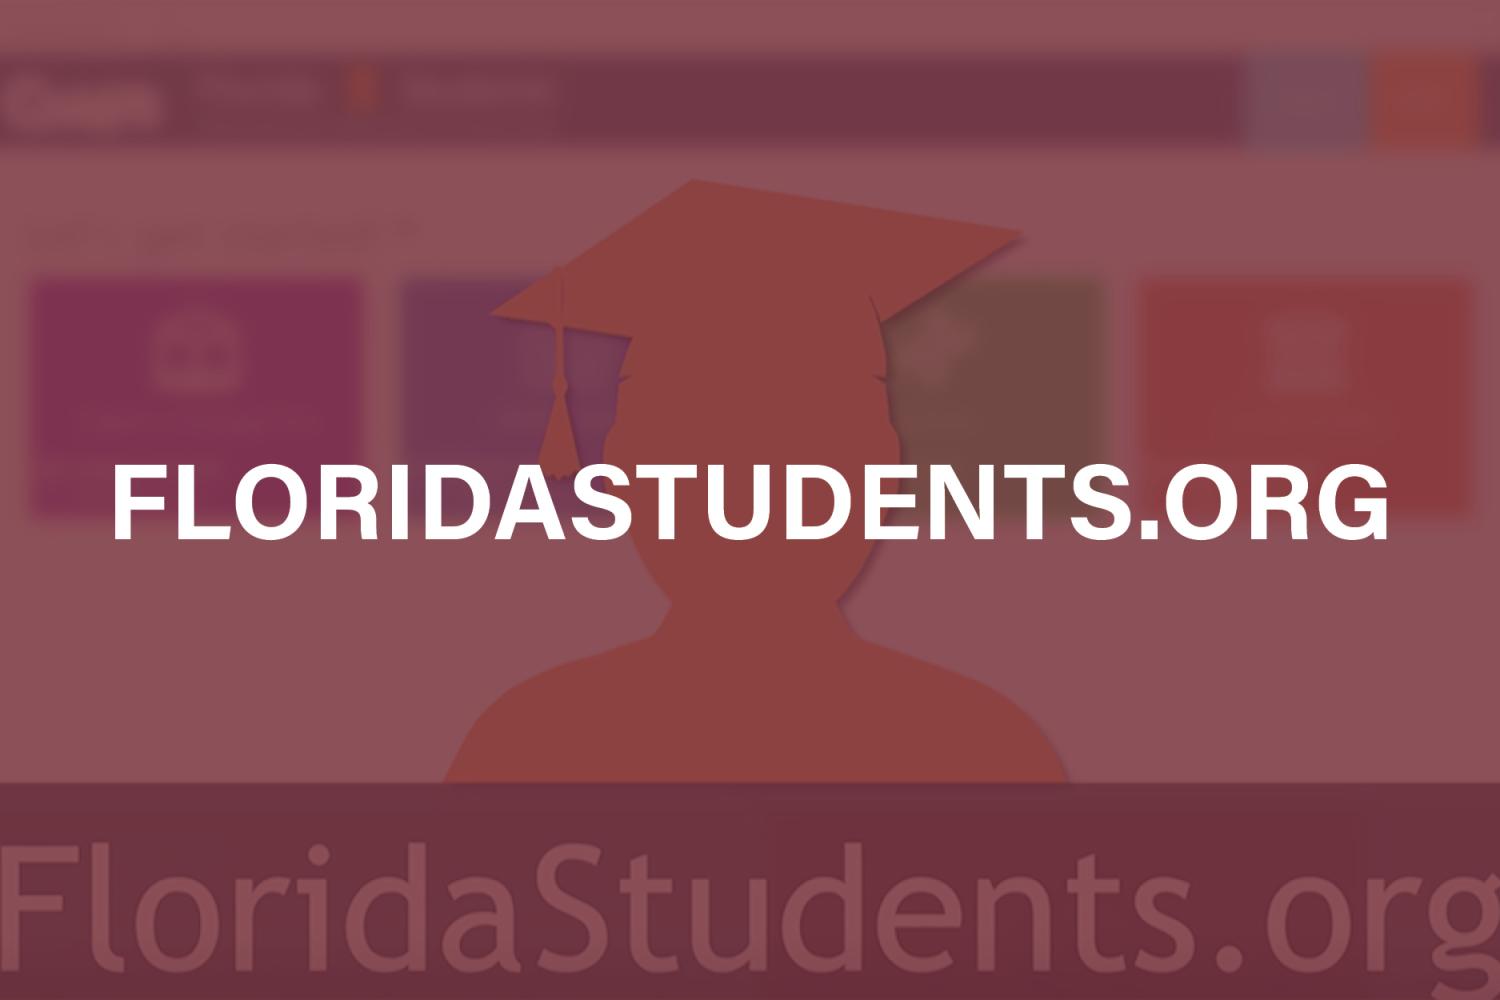 "Screen shot of the FloridaStudents.org website with a silhouette of a graduate."